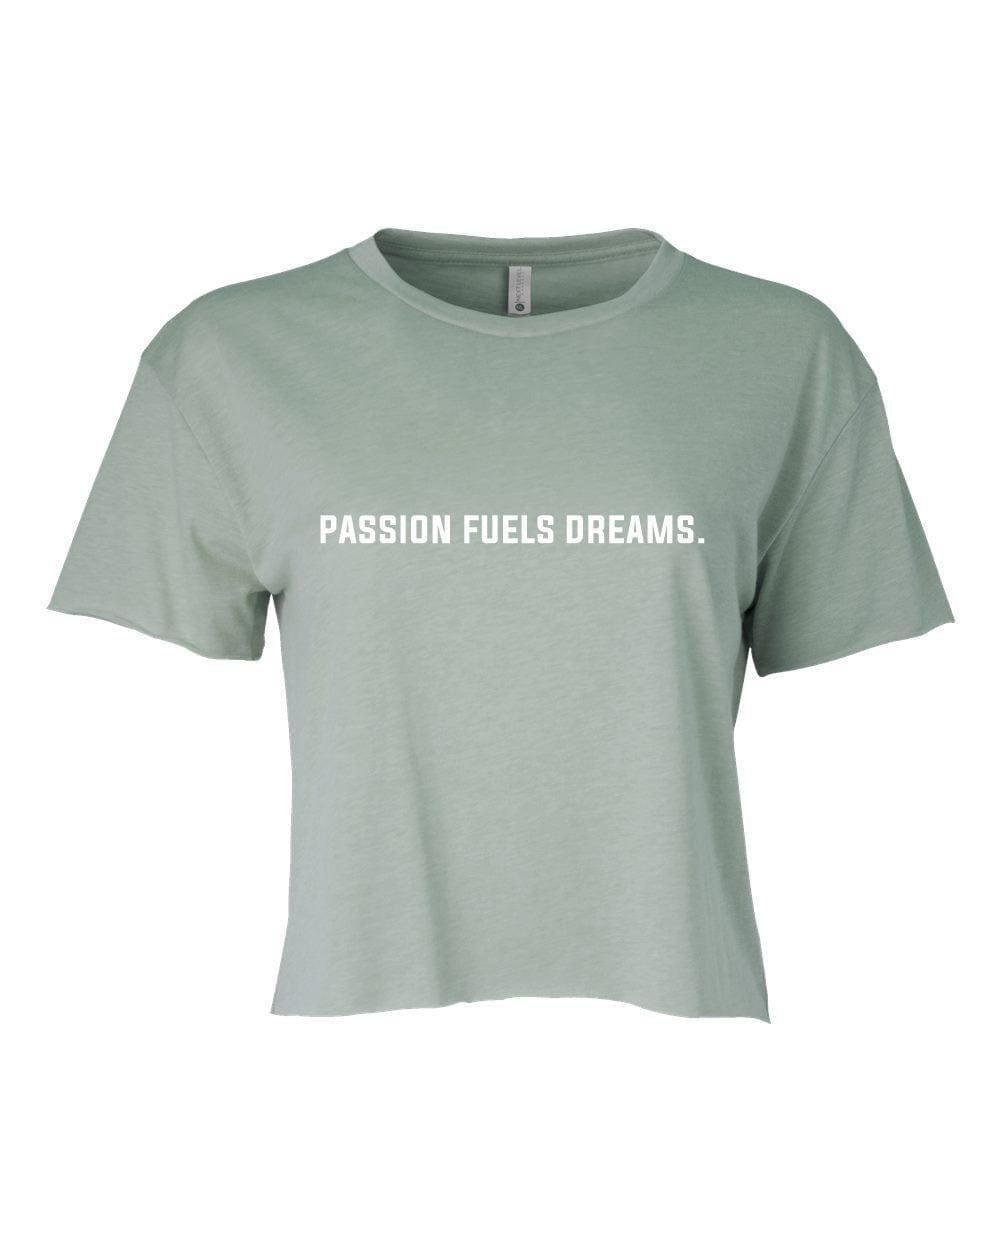 Passion Fuels Dreams Crop Tee - Inspired Eye Boutique